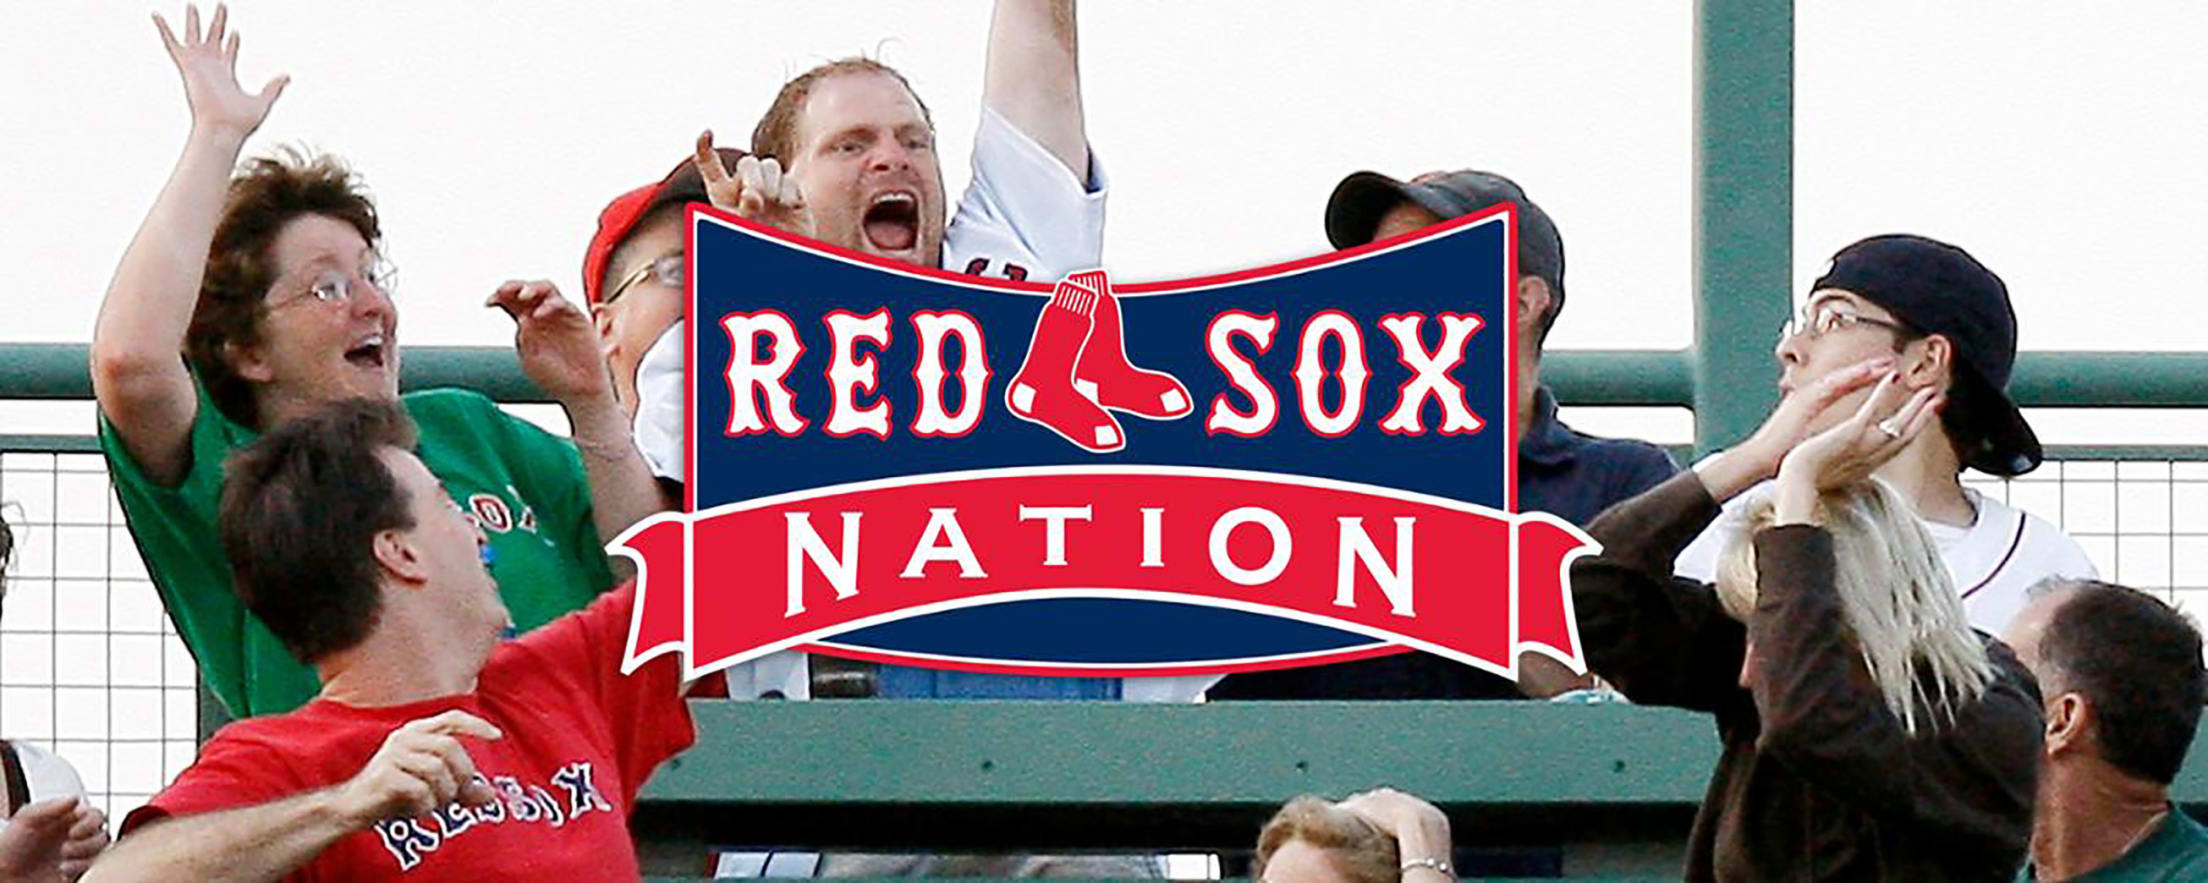 Boston Red Sox Nation: Here's the Scoop